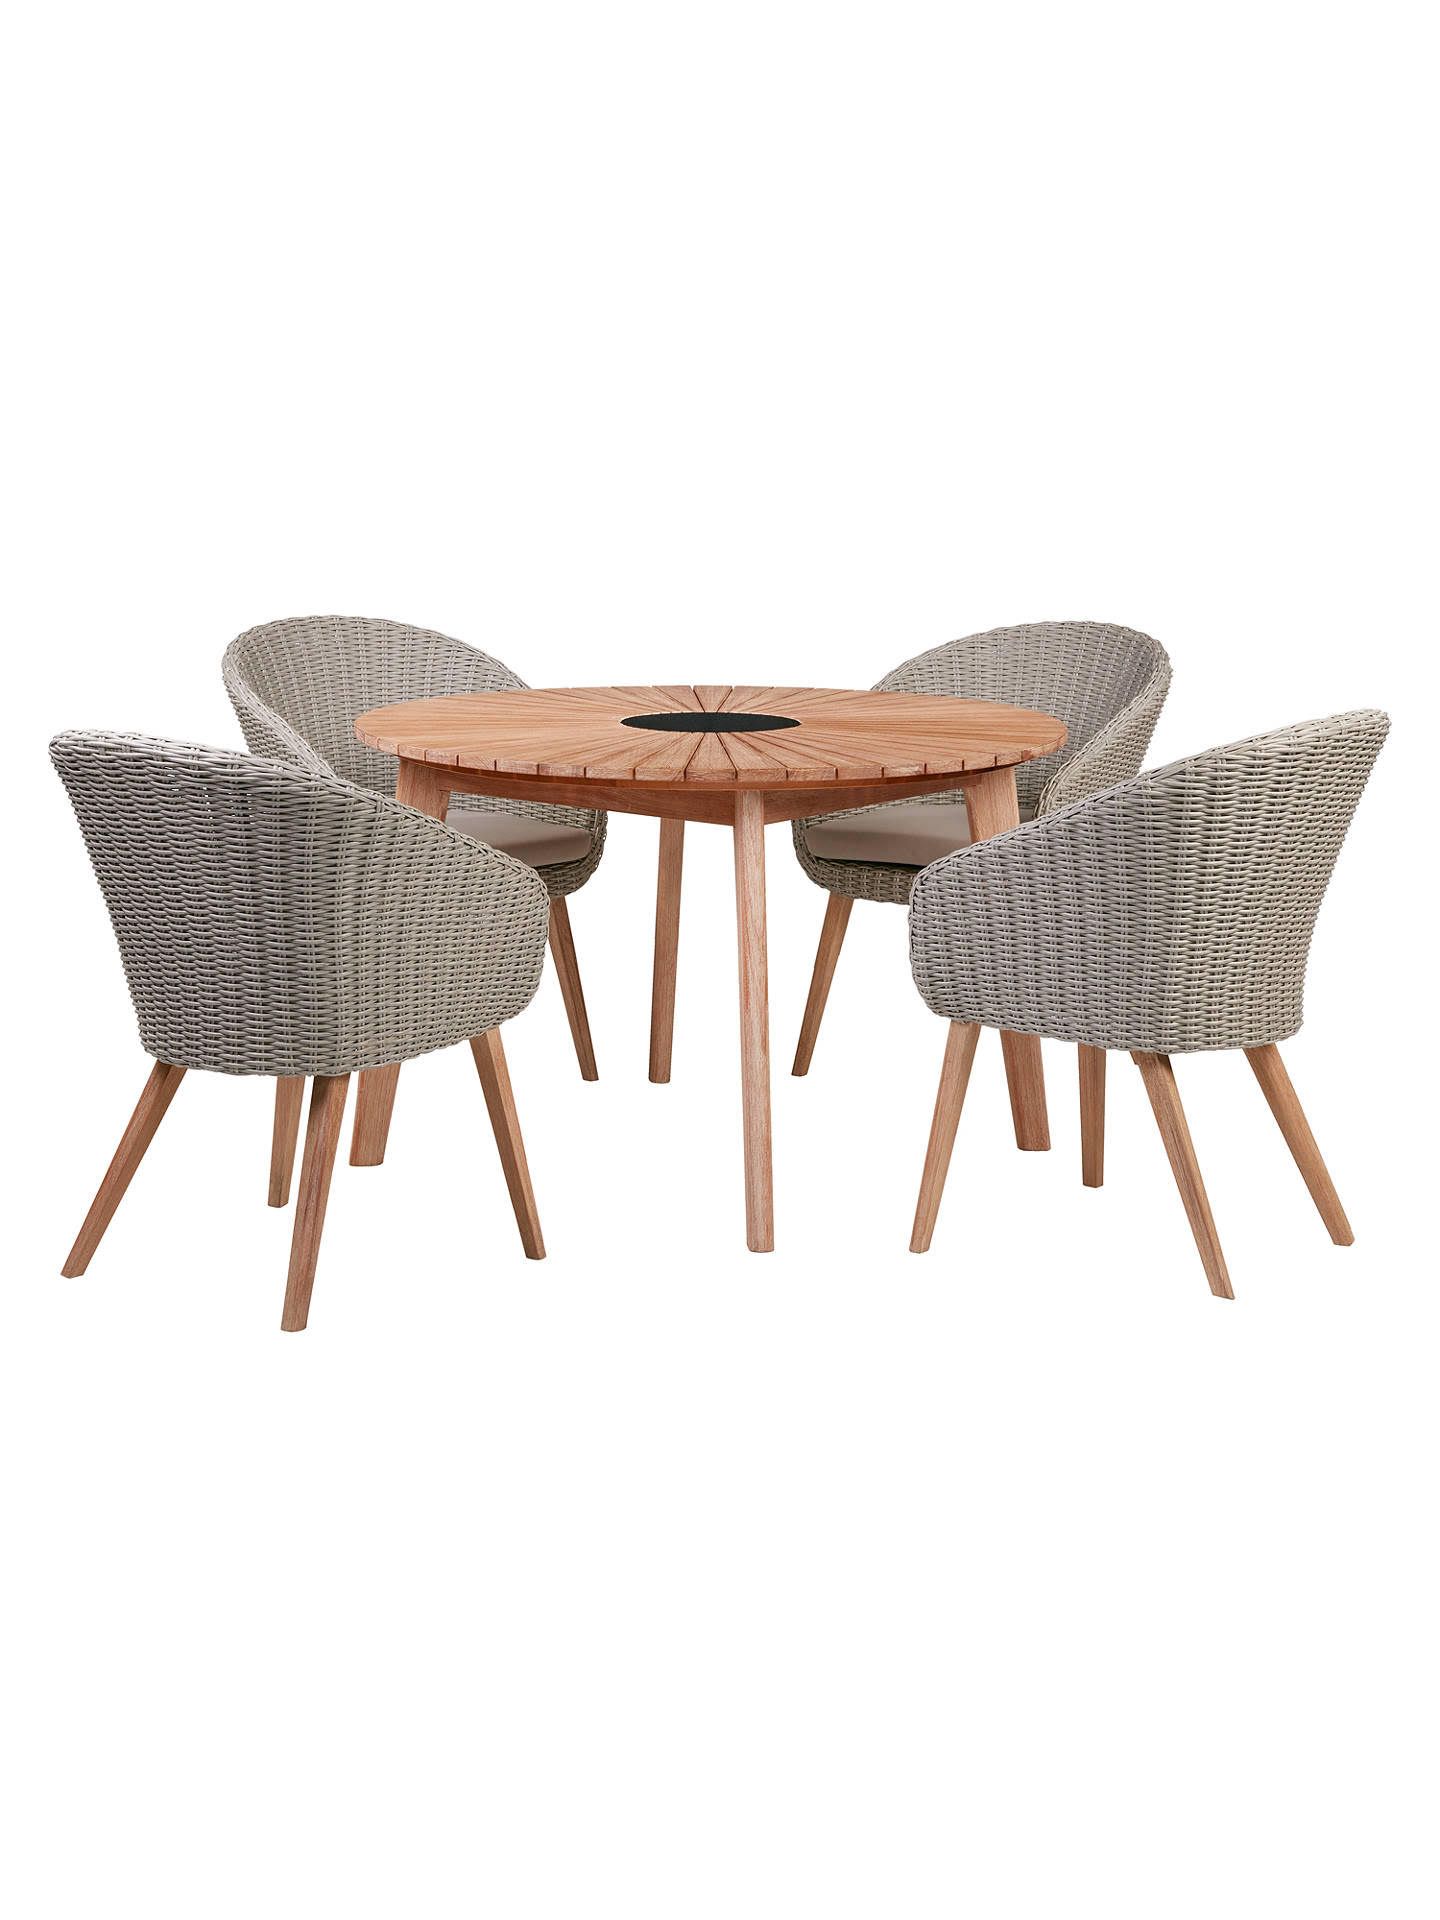 V Brand New To John Lewis Sol Four Seater Round Garden Table & Chairs ISP £999 (John Lewis) Stock